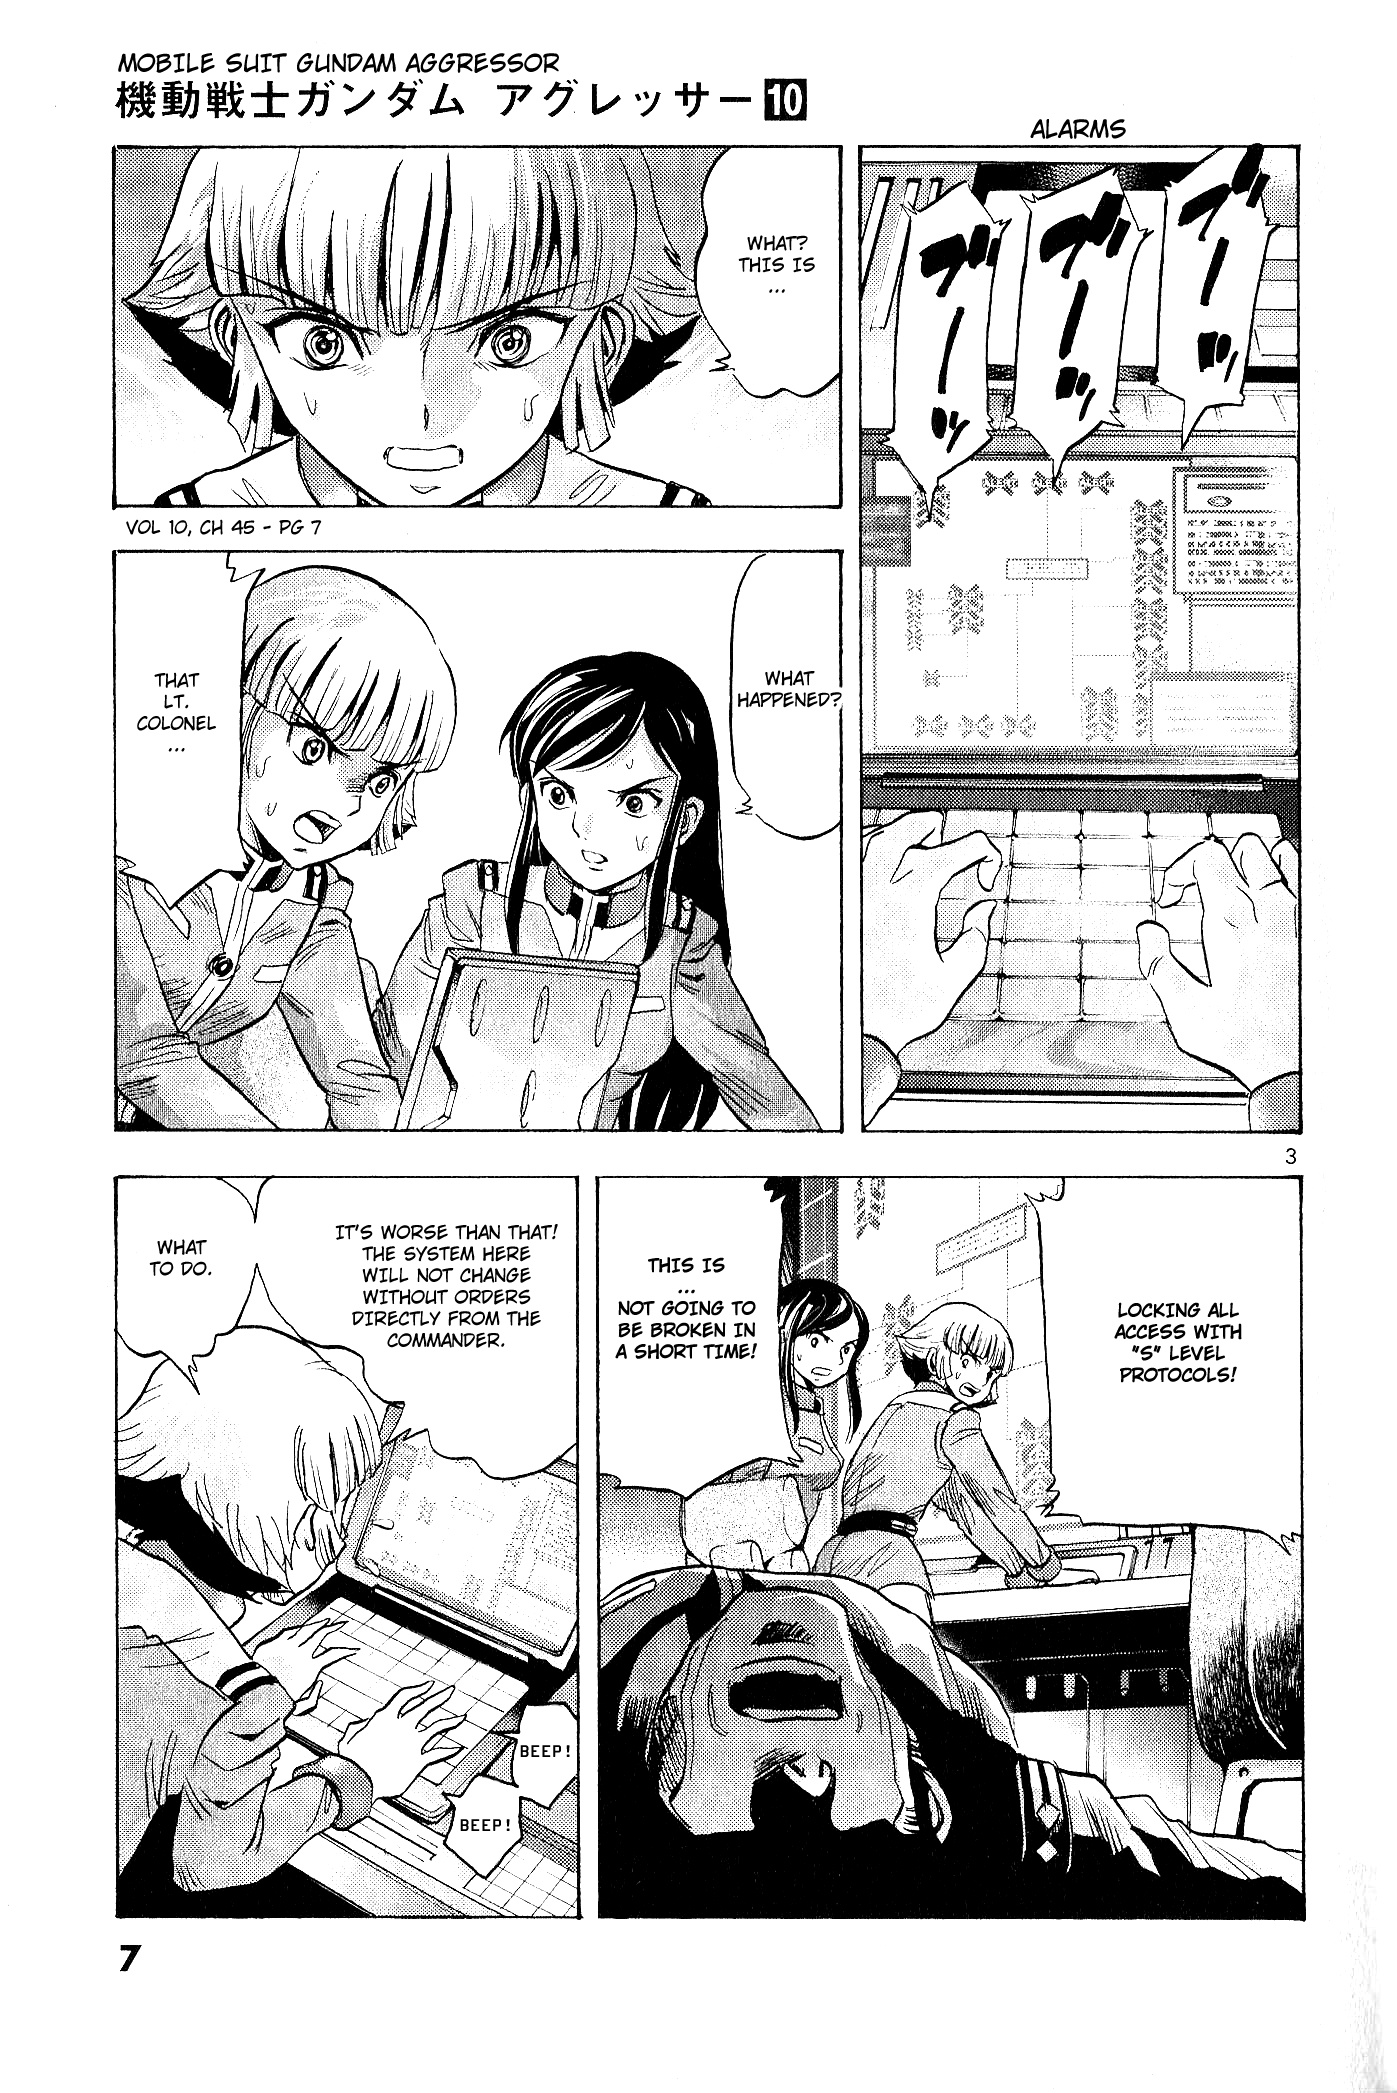 Mobile Suit Gundam Aggressor Vol.10 Chapter 45 - Picture 3